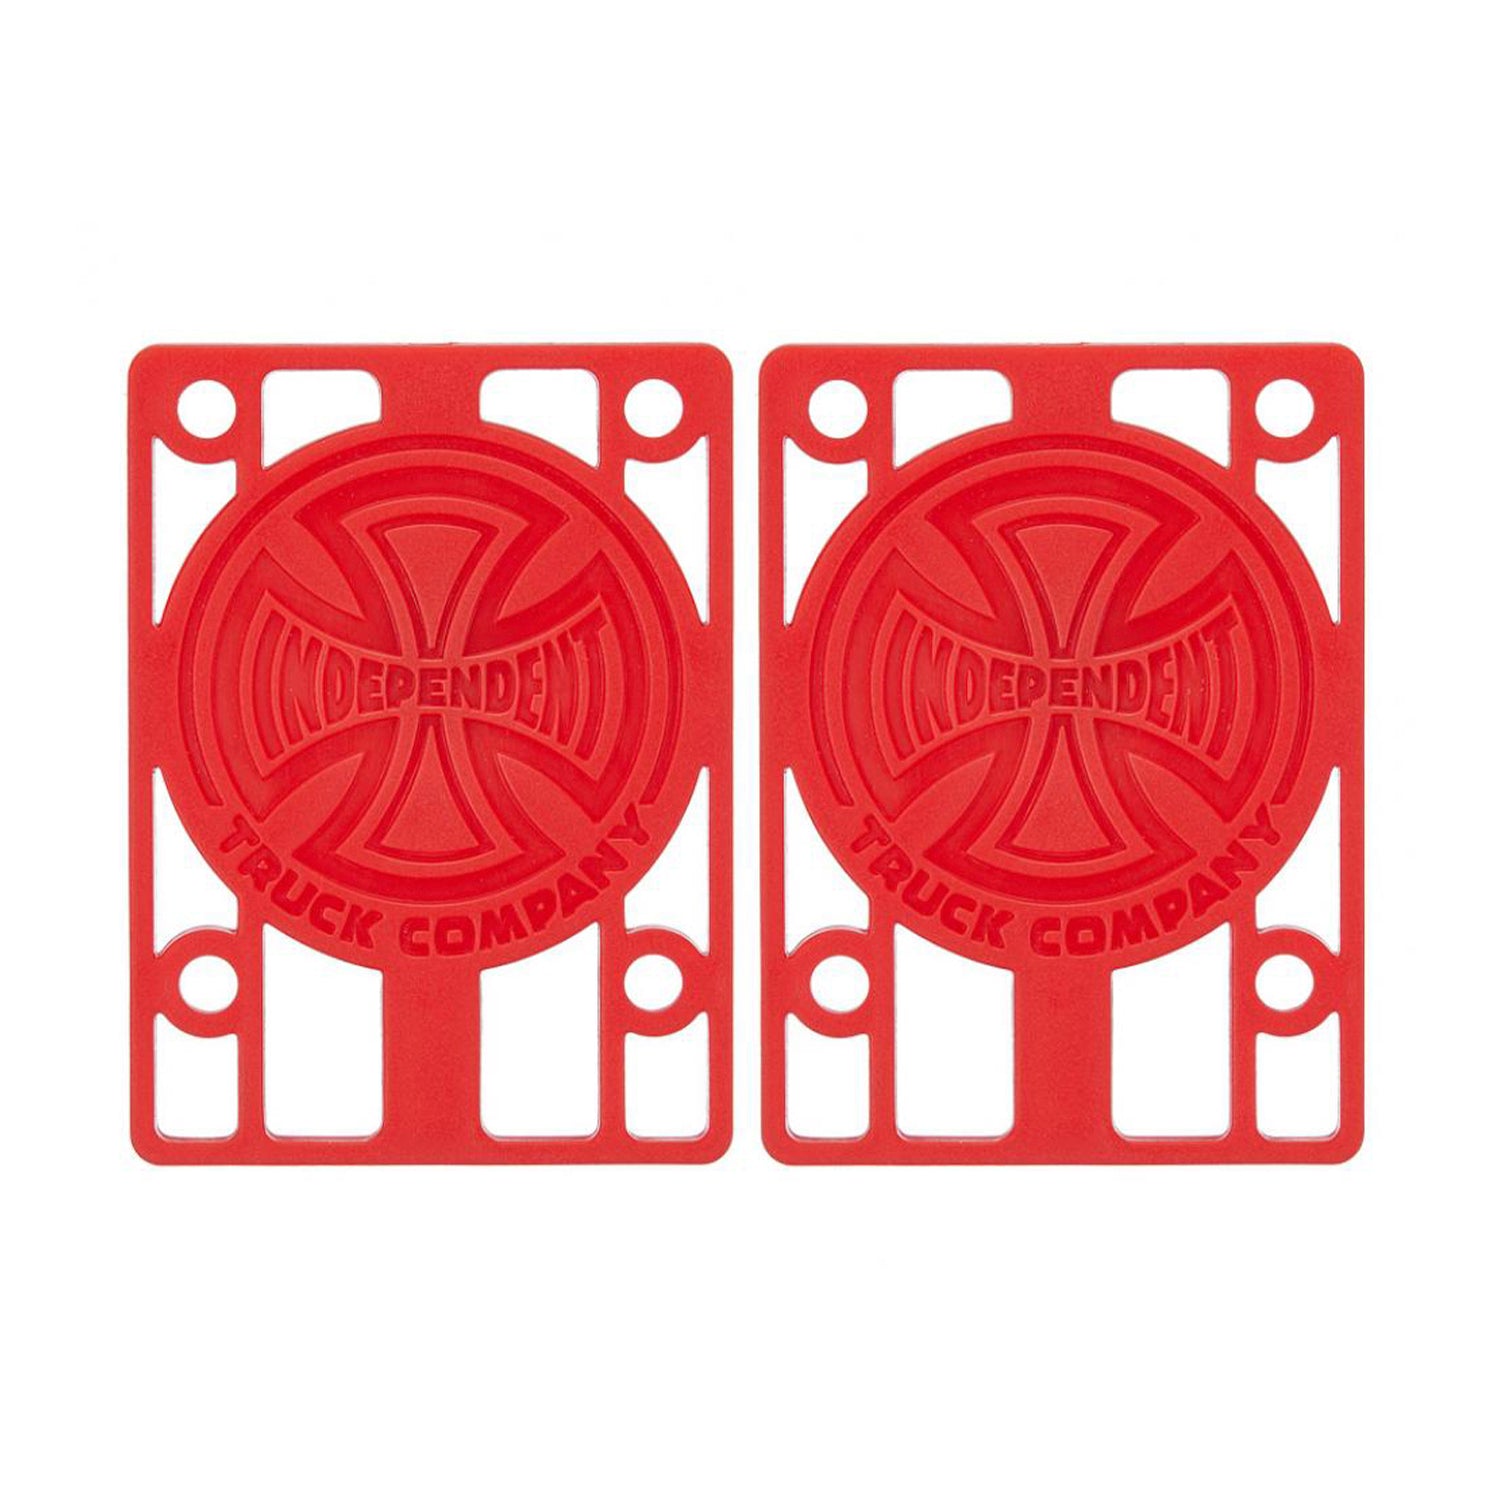 Independent 1/8" Riser Pads - Red - Prime Delux Store